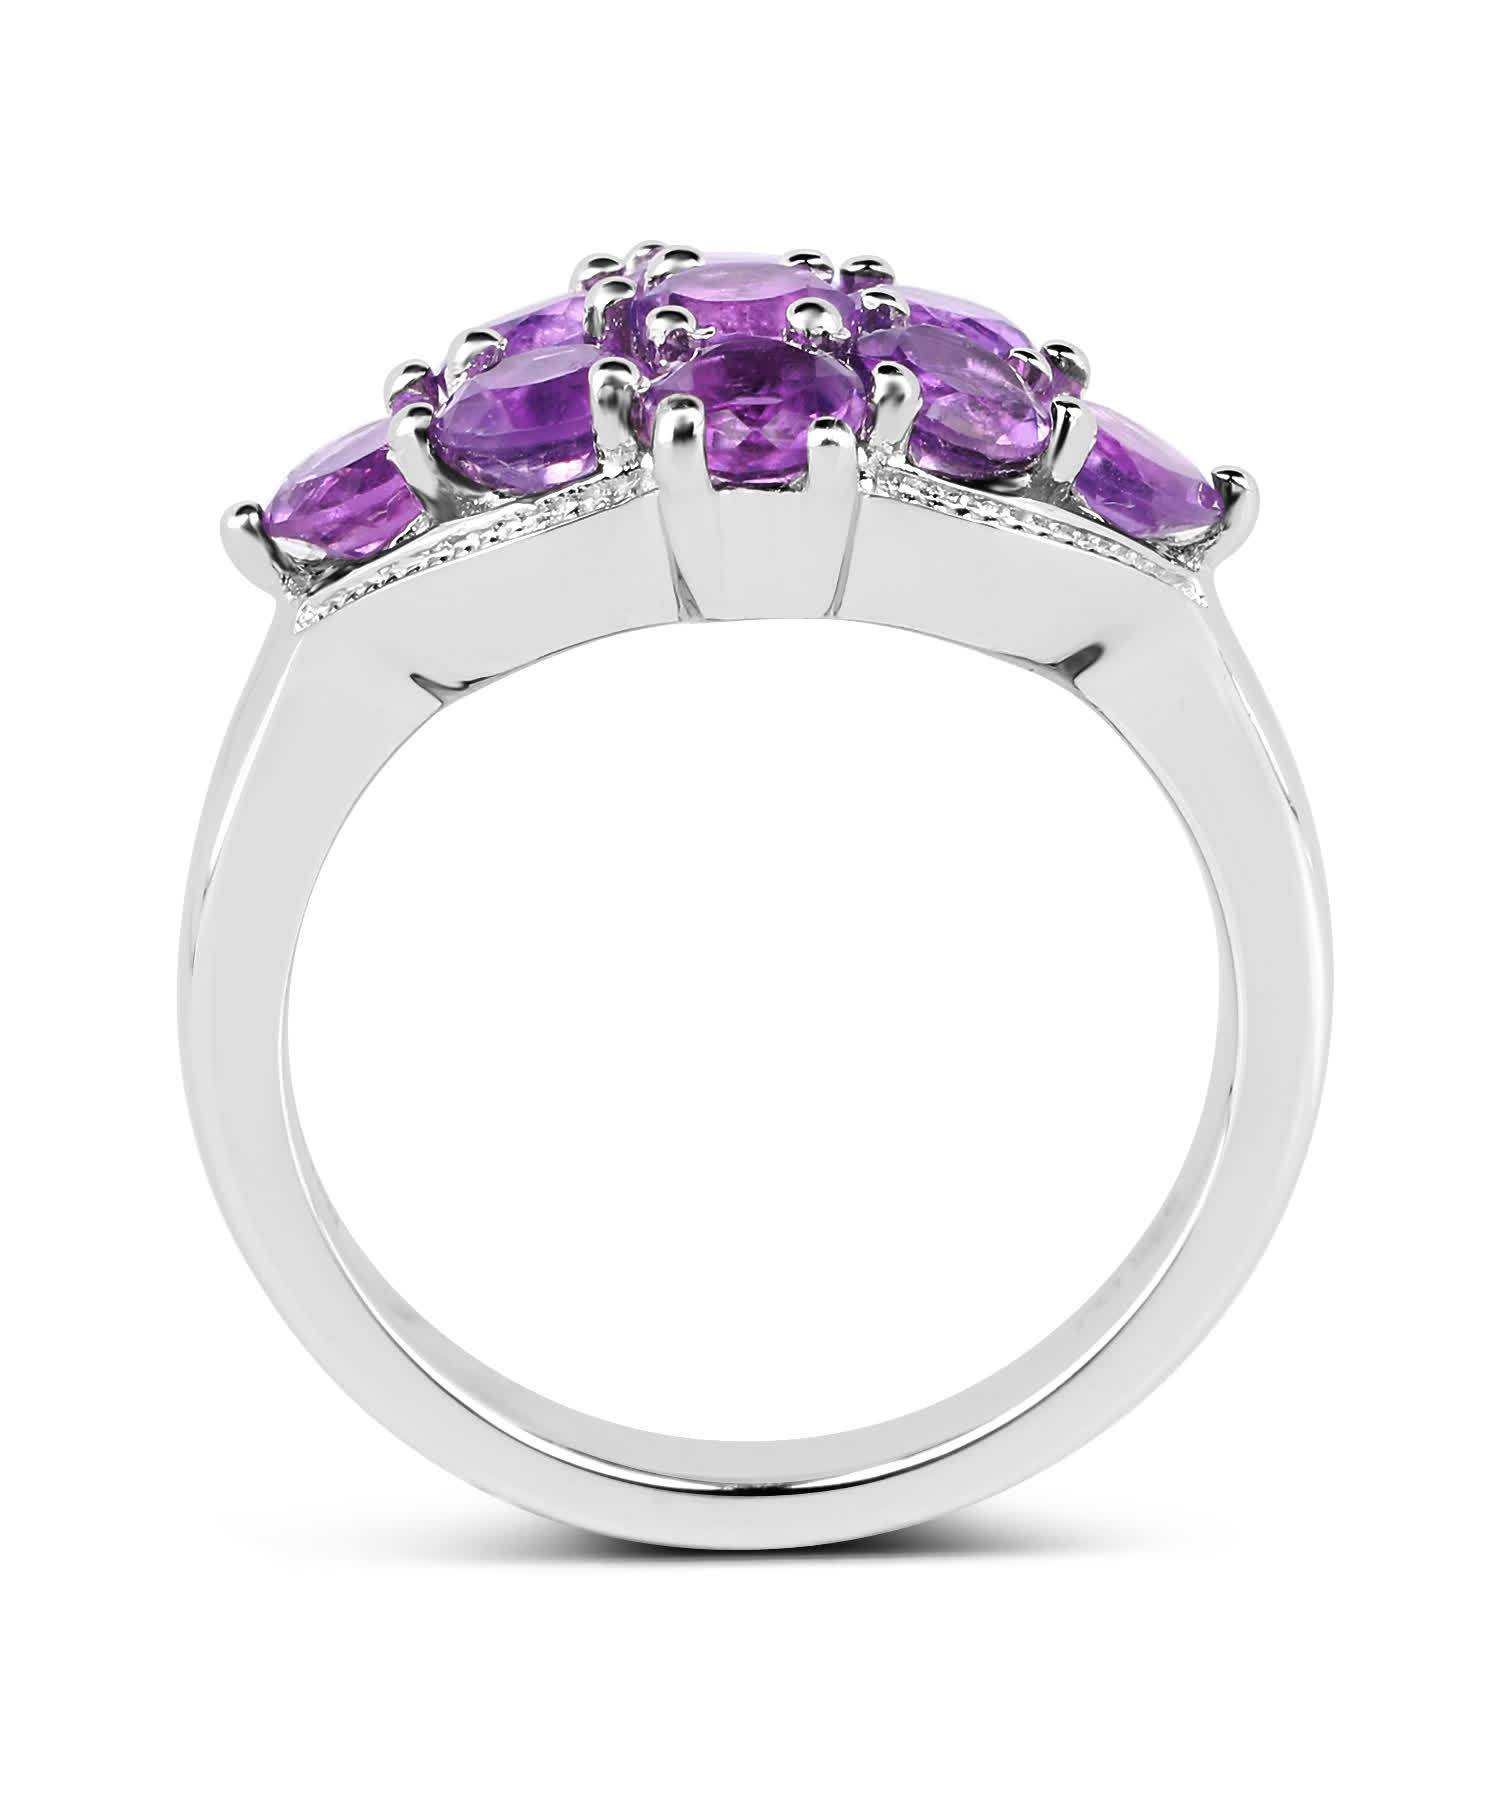 2.16ctw Natural Amethyst Rhodium Plated 925 Sterling Silver Right Hand Ring View 2